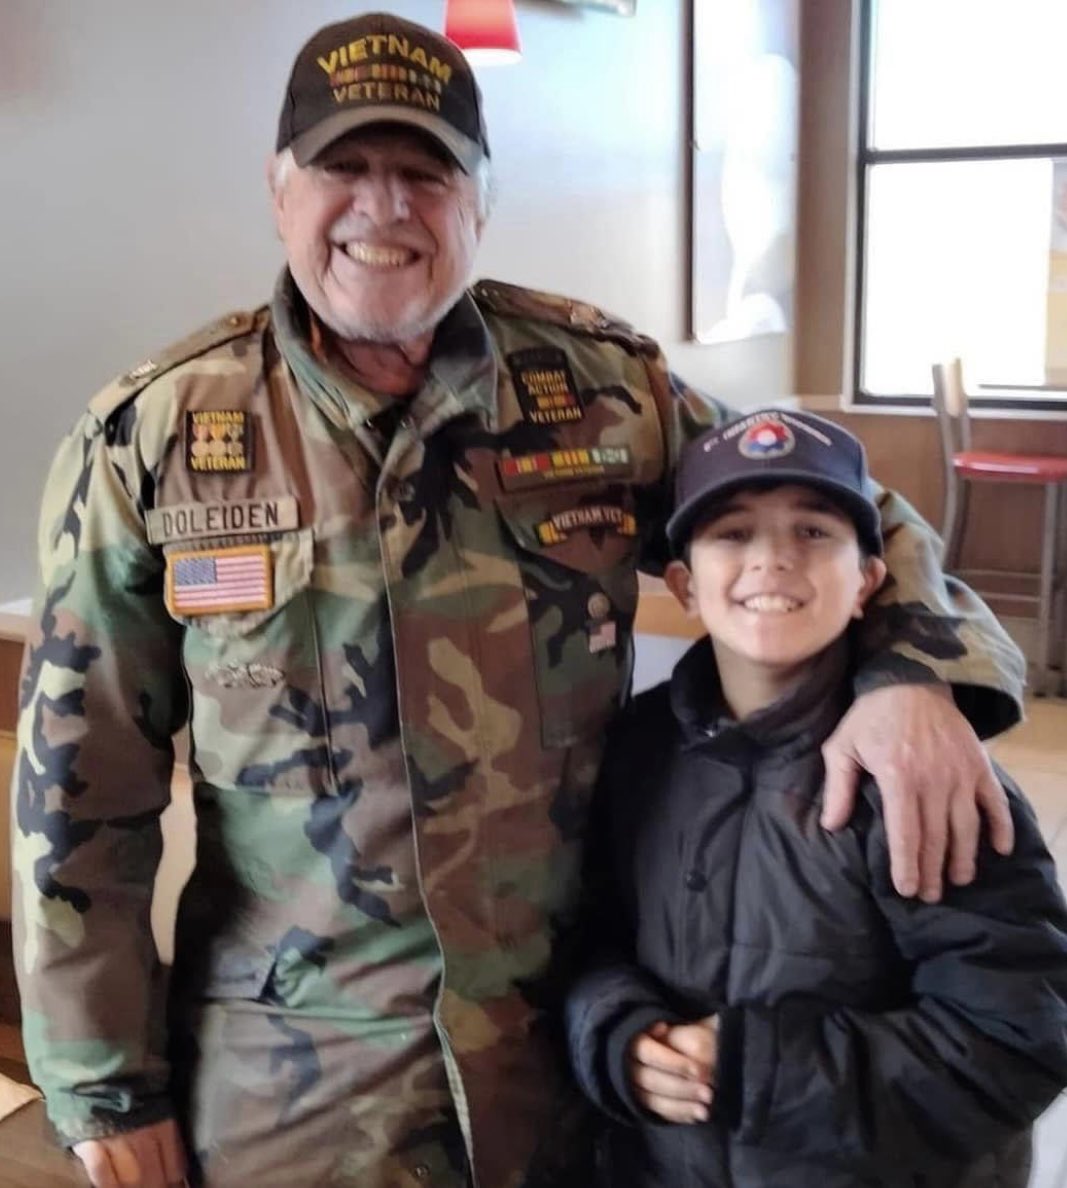 “My son saw a Vietnam Veteran at Burger King and went up to him and thanked him for his service and sacrifice while wearing his uncle's 9th infintry cap. (His great uncle was KIA 19 June 1967).”
- Joey Messina
#veterans #HonorThem
#VeteransLivesMatter